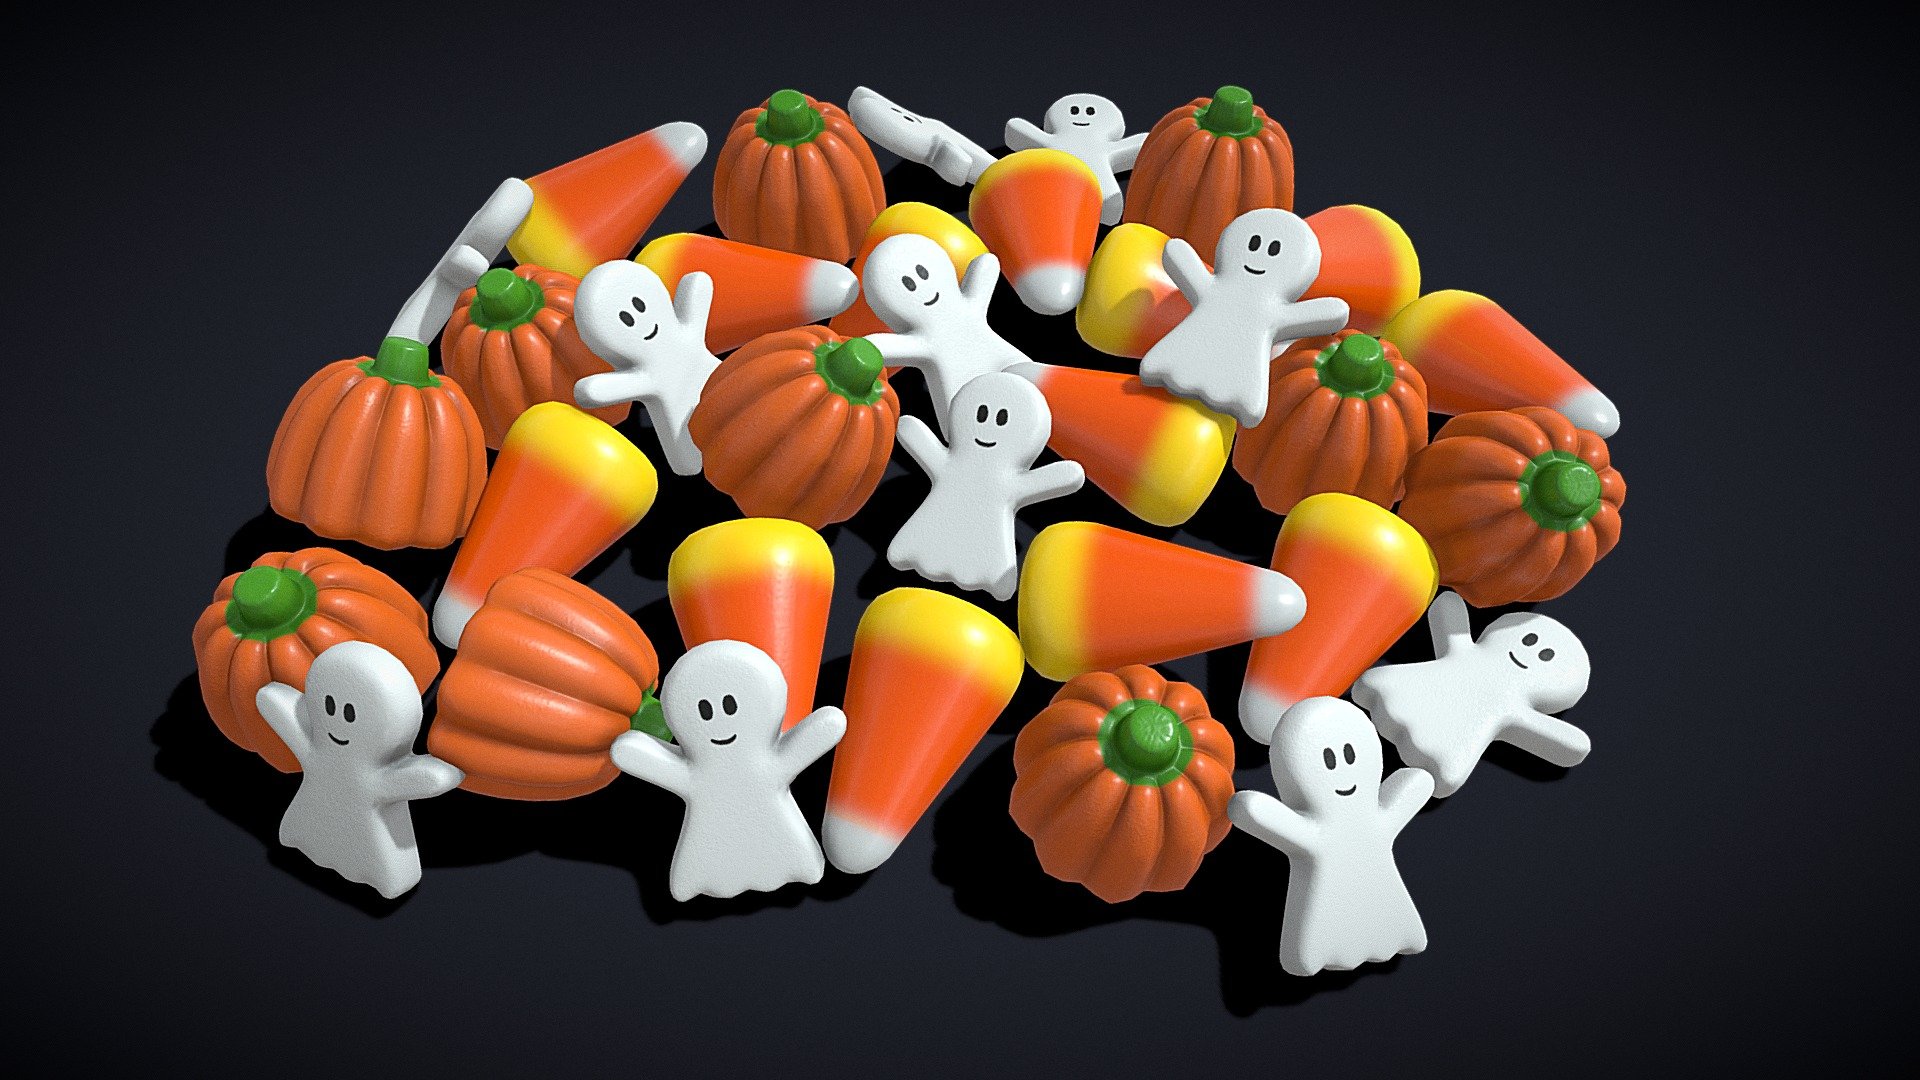 Ghost Candy Halloween Mix
VR / AR / Low-poly
PBR approved
Geometry Polygon mesh
Polygons 19,017
Vertices 18,062
Textures 4K PNG
Materials 3 - Ghost Candy Halloween Mix - Buy Royalty Free 3D model by GetDeadEntertainment 3d model